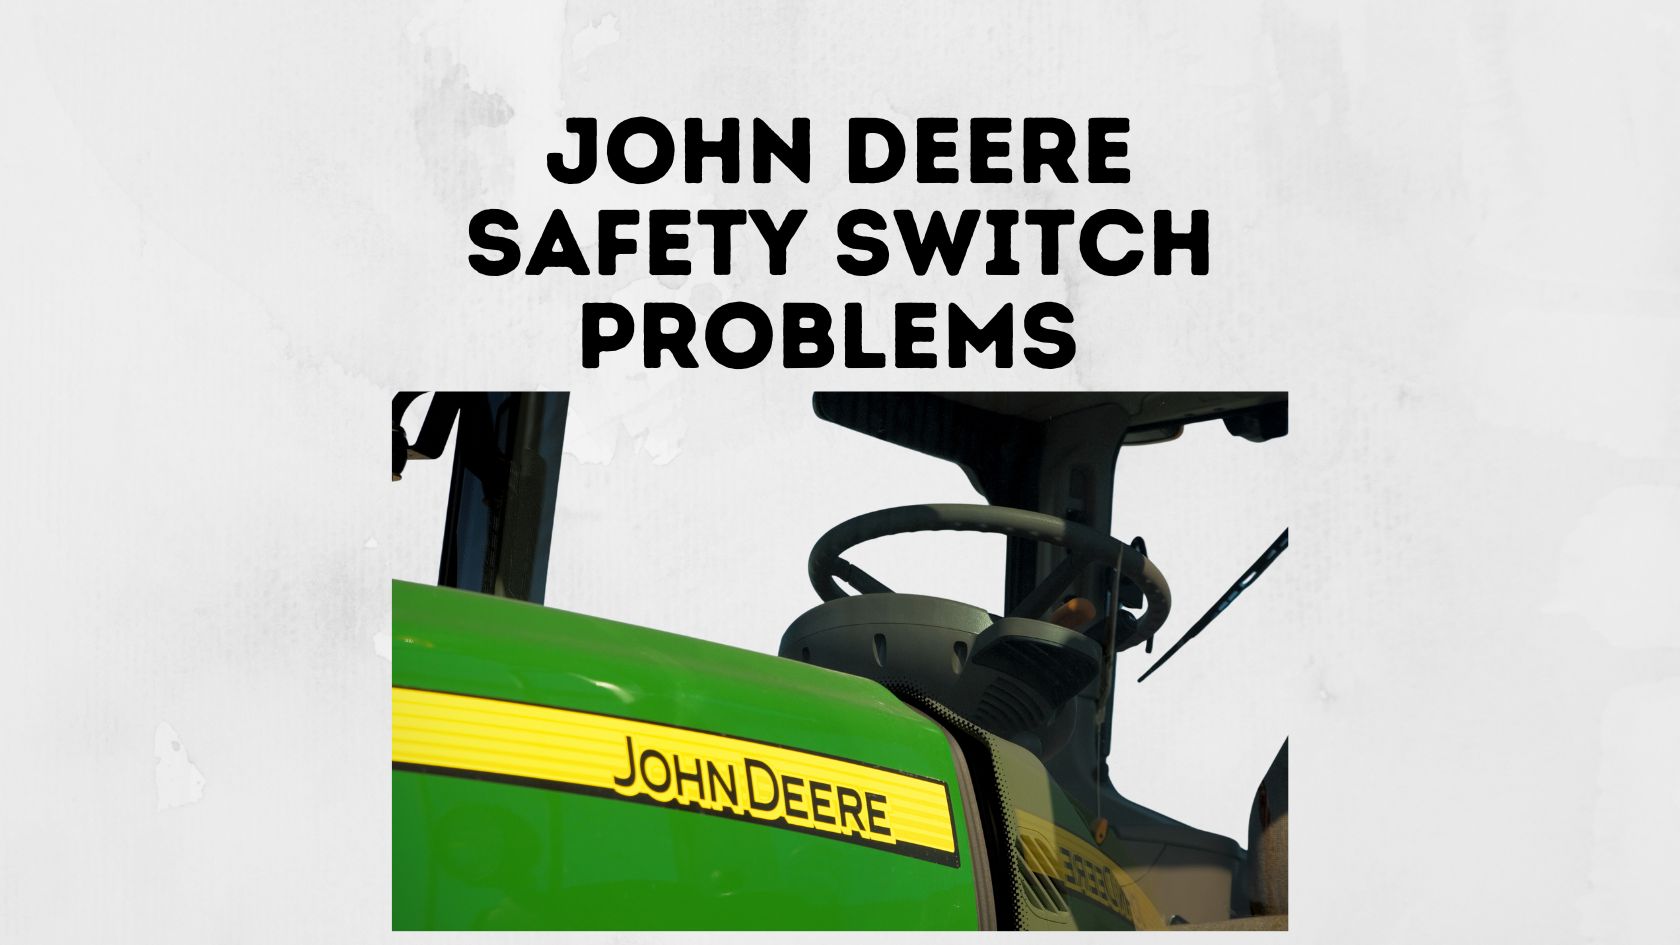 John Deere Safety Switch Problems